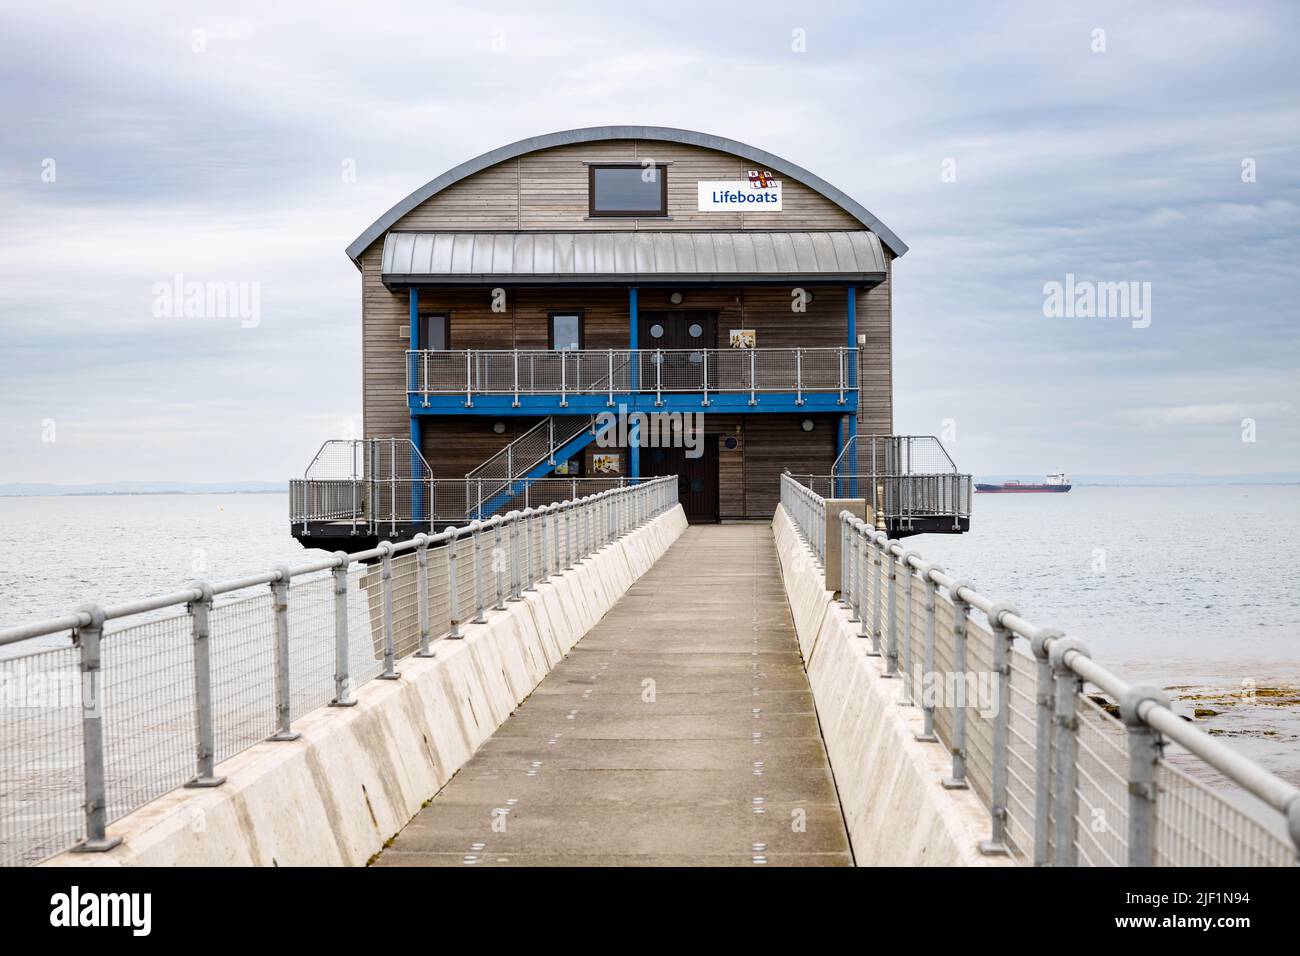 Front end view along a concrete bridge to the wooden clad Bembridge Royal National Lifeboat Institution RNLI Life Boat Station on the Isle of Wight Stock Photo